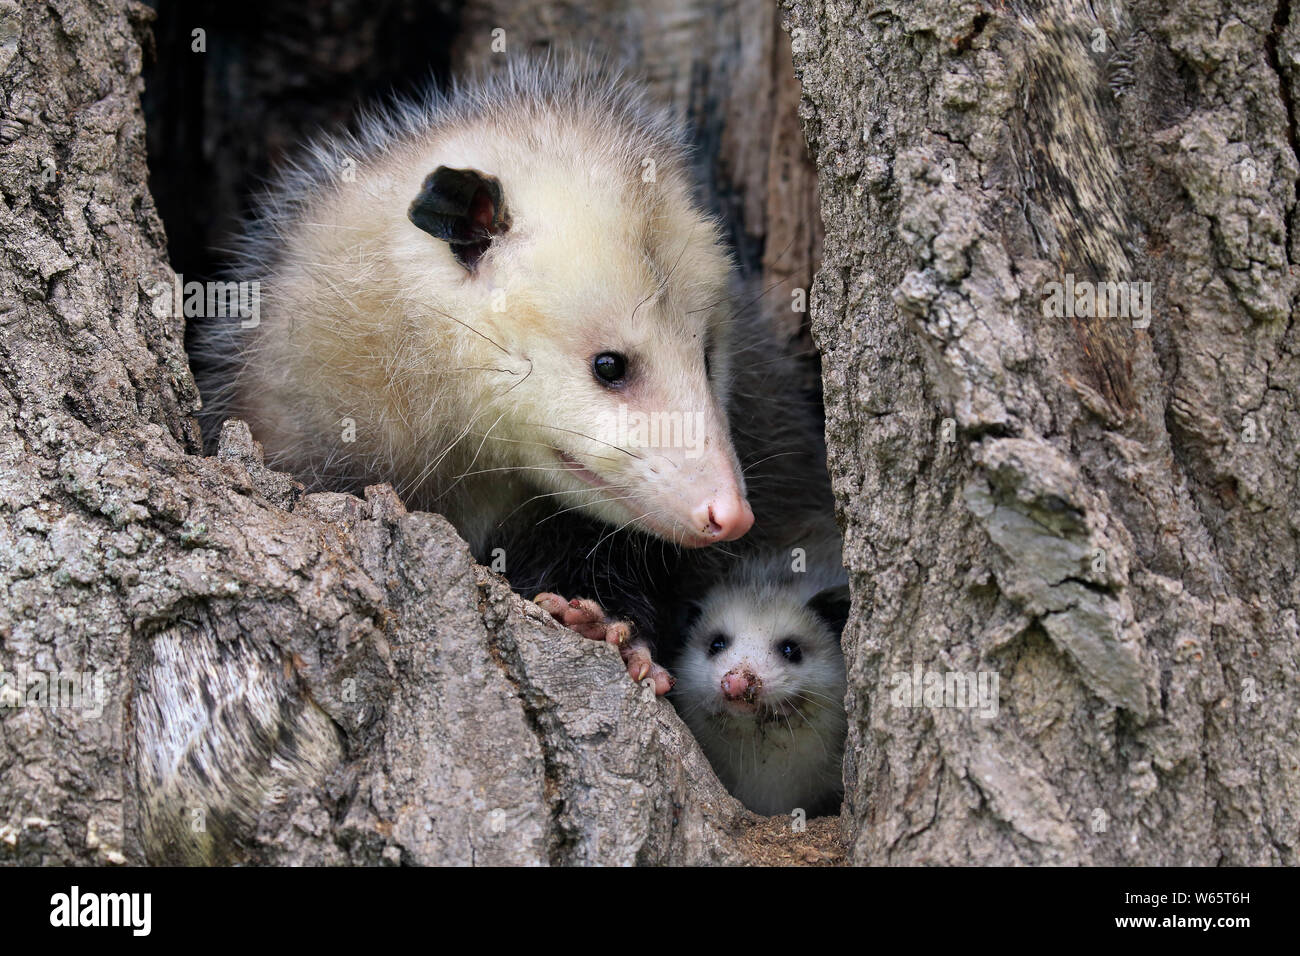 Virginia opossum, North American opossum, adult with young looking out of den, Pine County, Minnesota, USA, North America, (Didelphis virginiana) Stock Photo